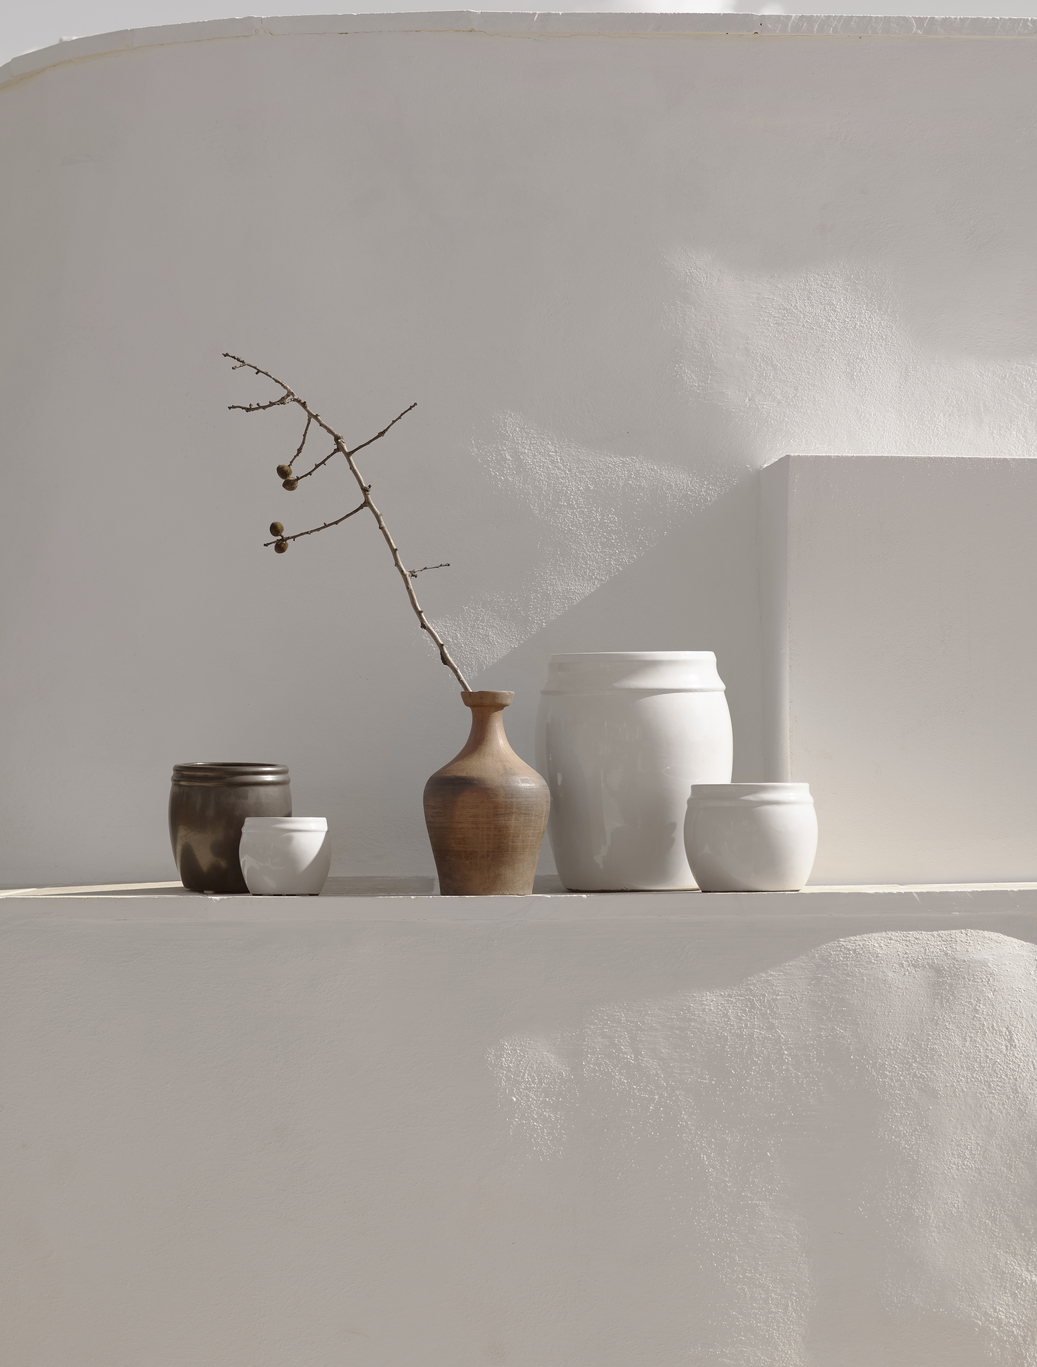 Warm Mediterranean Living With the Tine K Home Stay Collection